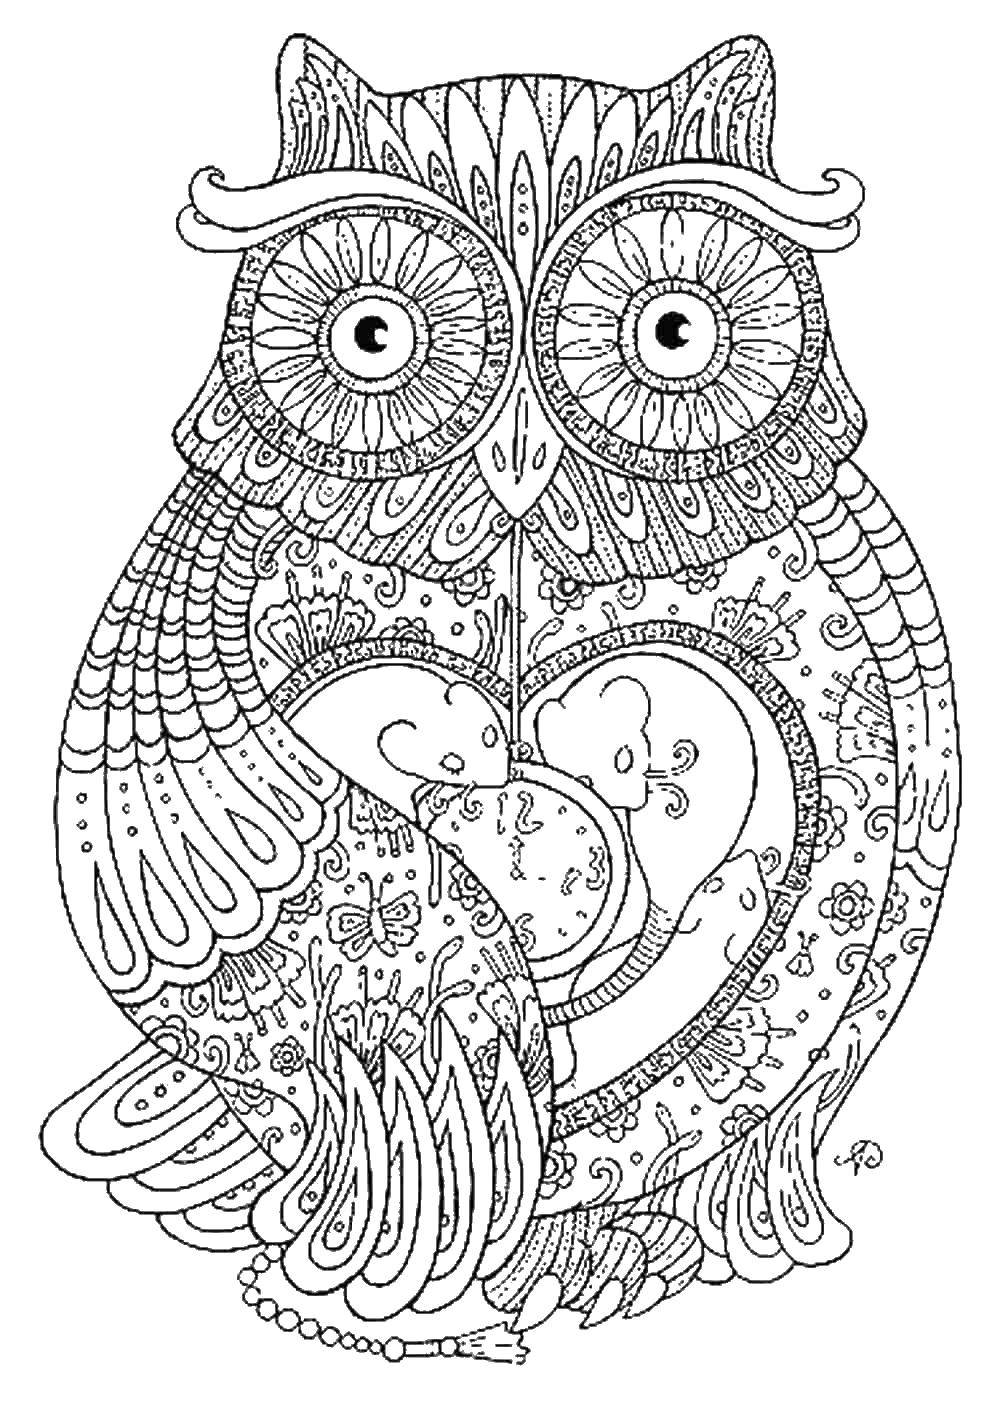 Coloring Uzorchiki on the owl. Category patterns. Tags:  patterns, owl, bird.